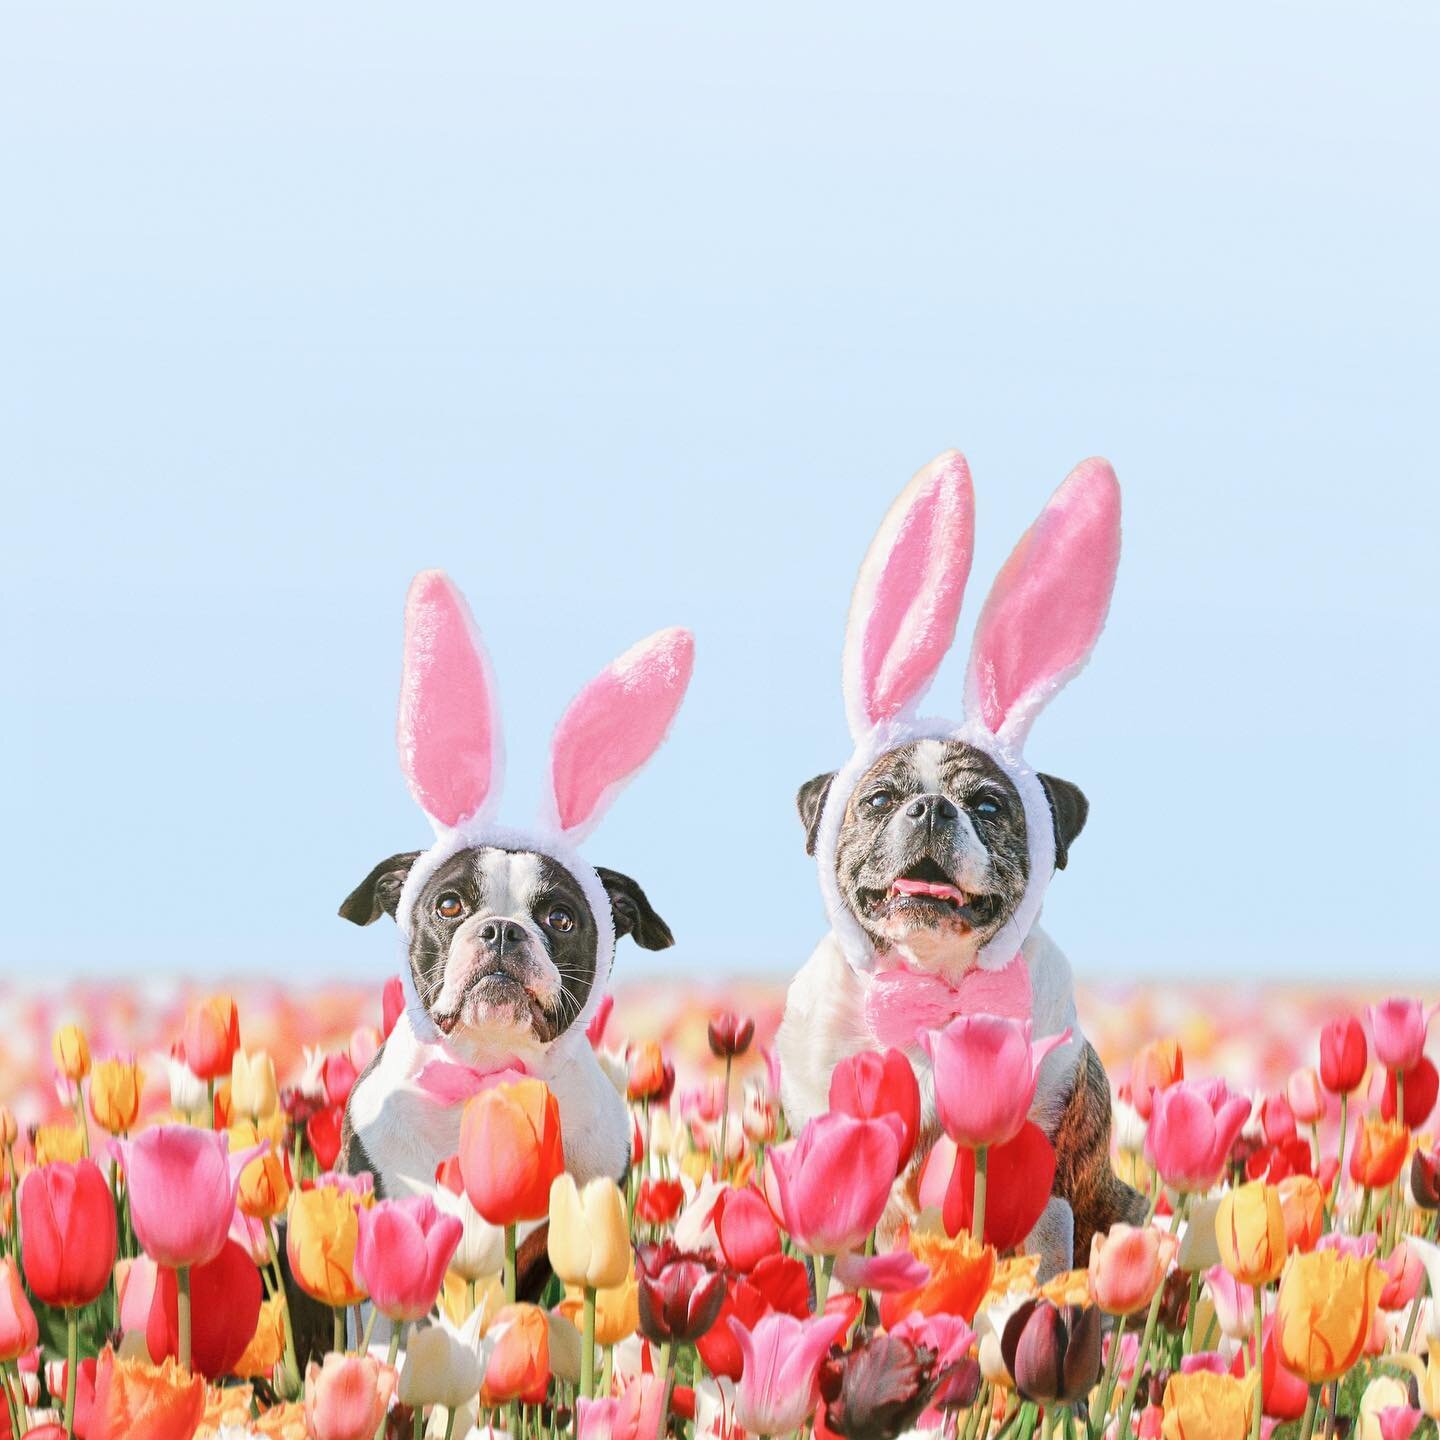 You&rsquo;re simply ear-resistible! 🐰 Wishing everybunny a very happy Easter weekend. 🌷🌷🌷